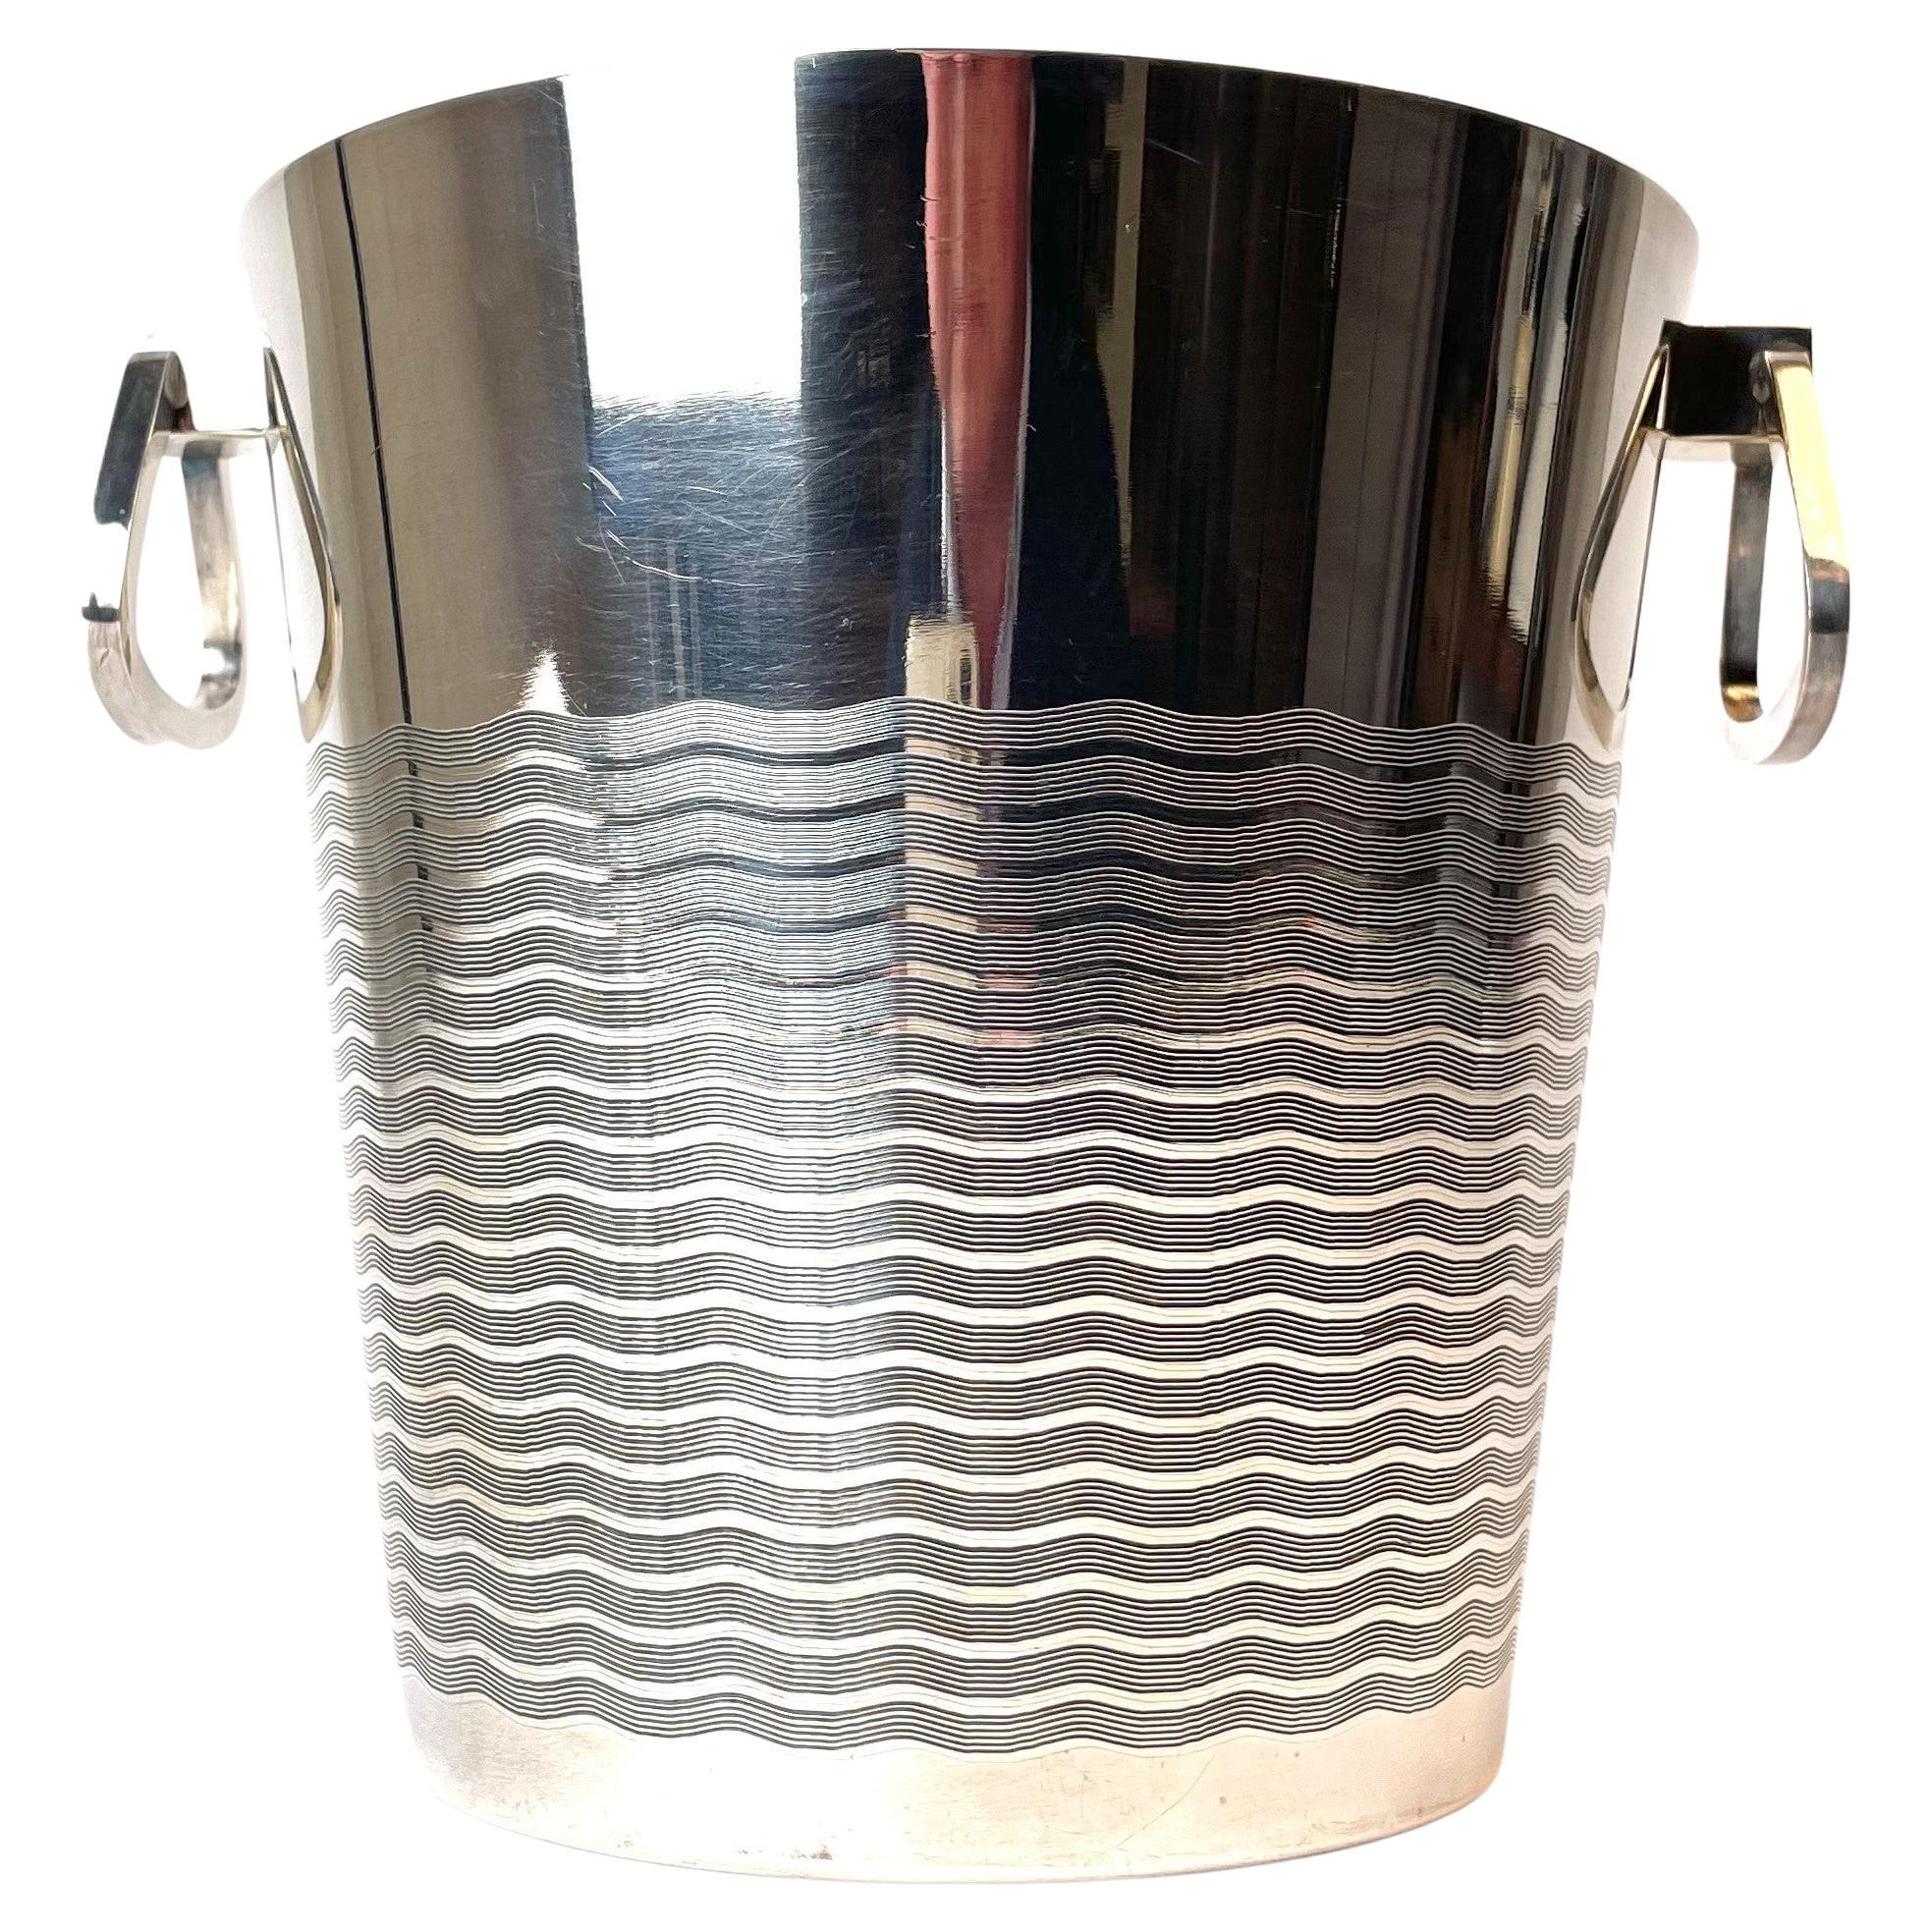 Elegant Wine Cooler with Decor of Waves from 1930s-1940s For Sale